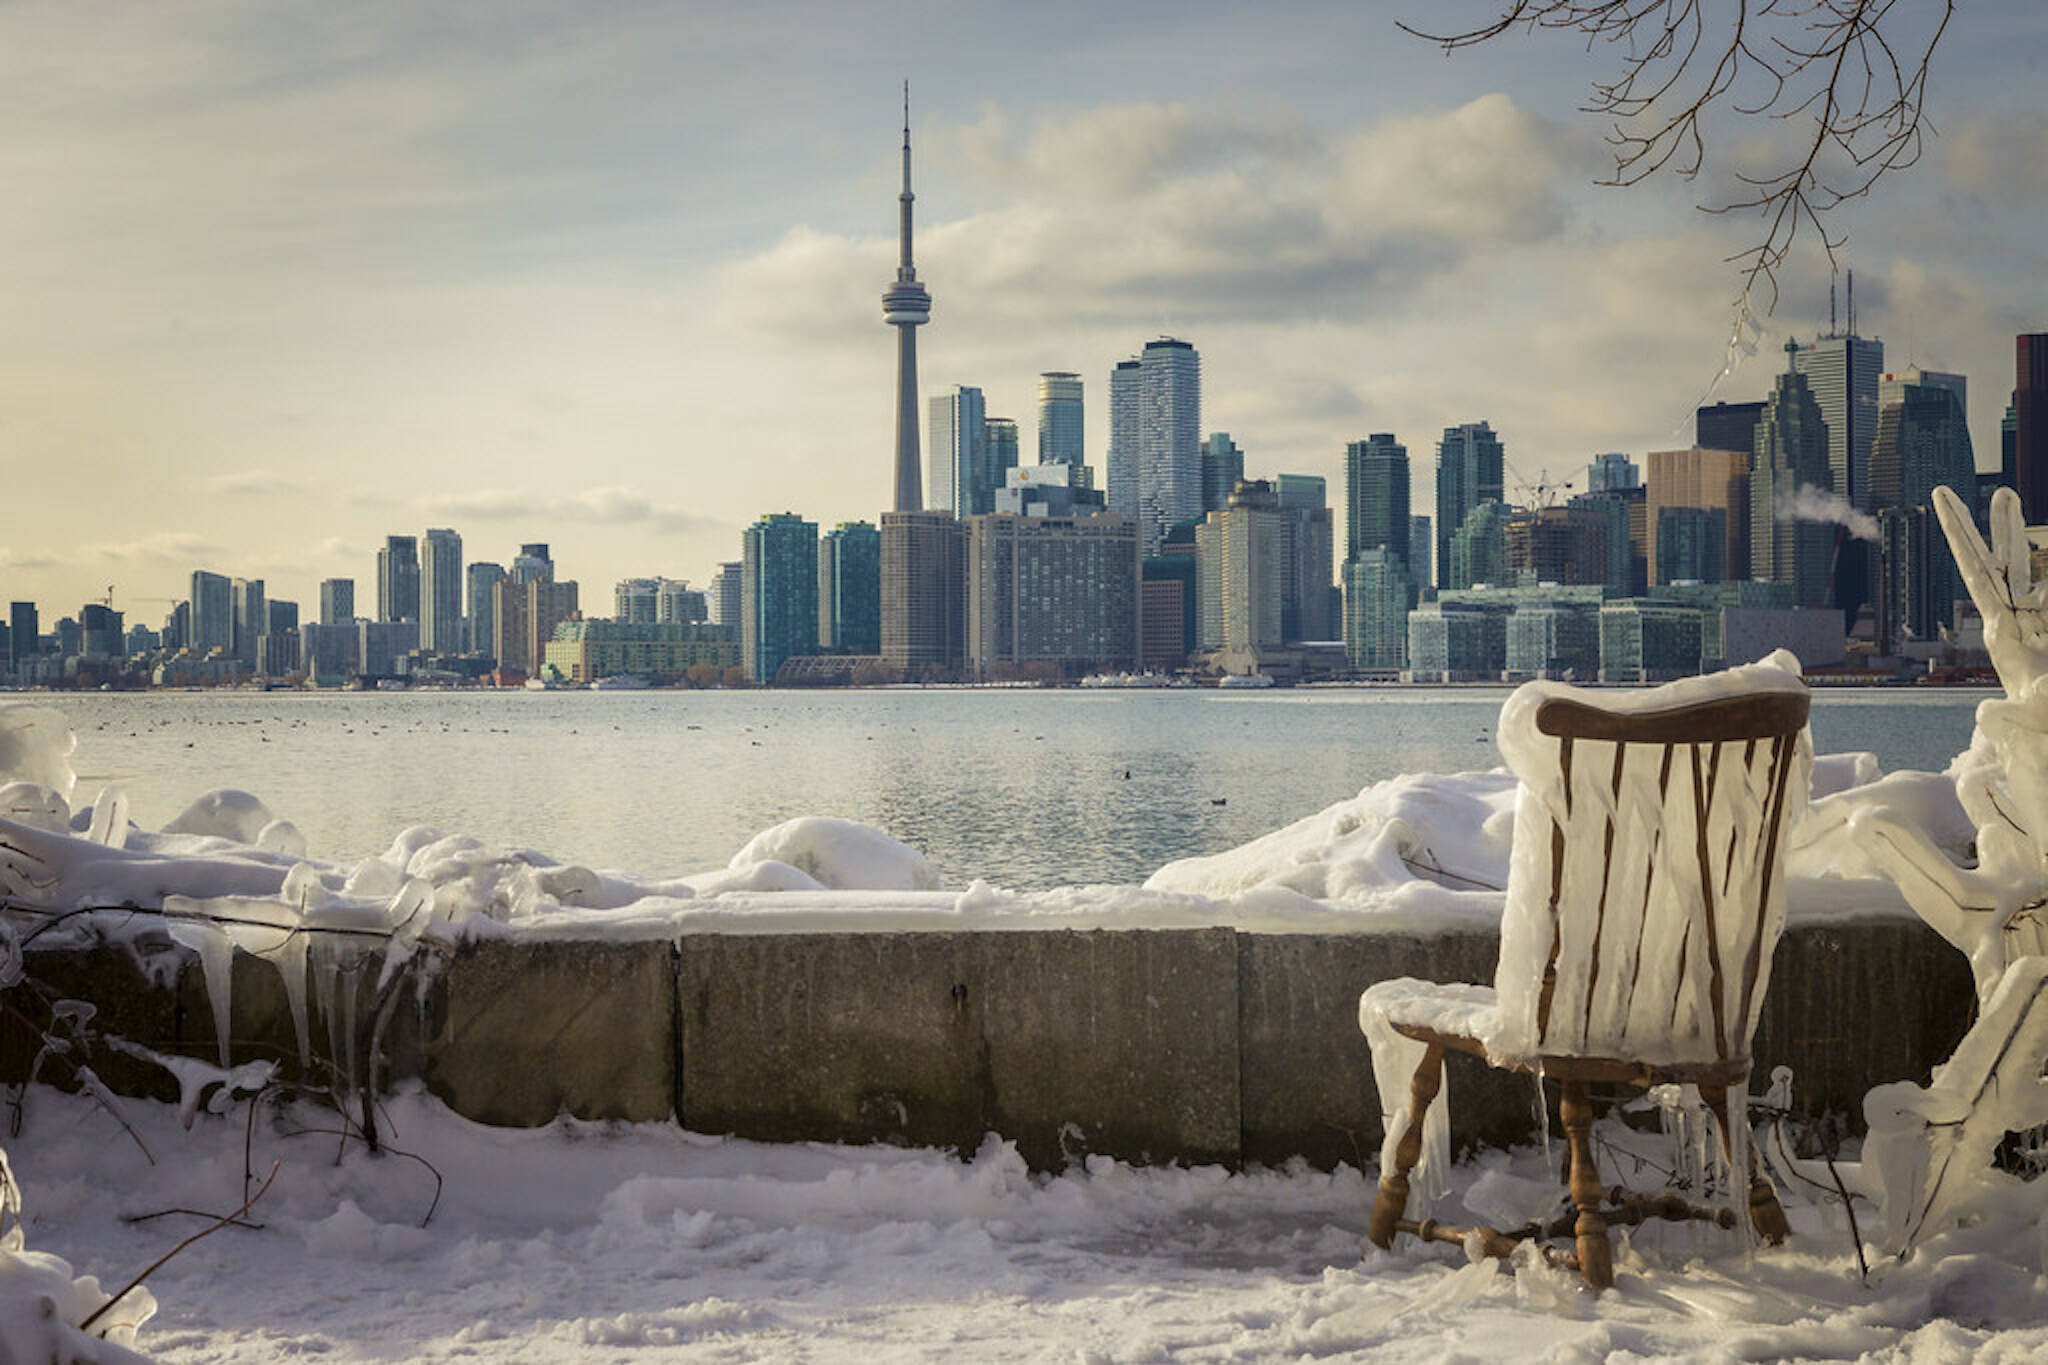 When will Toronto get its first snowfall of the season?